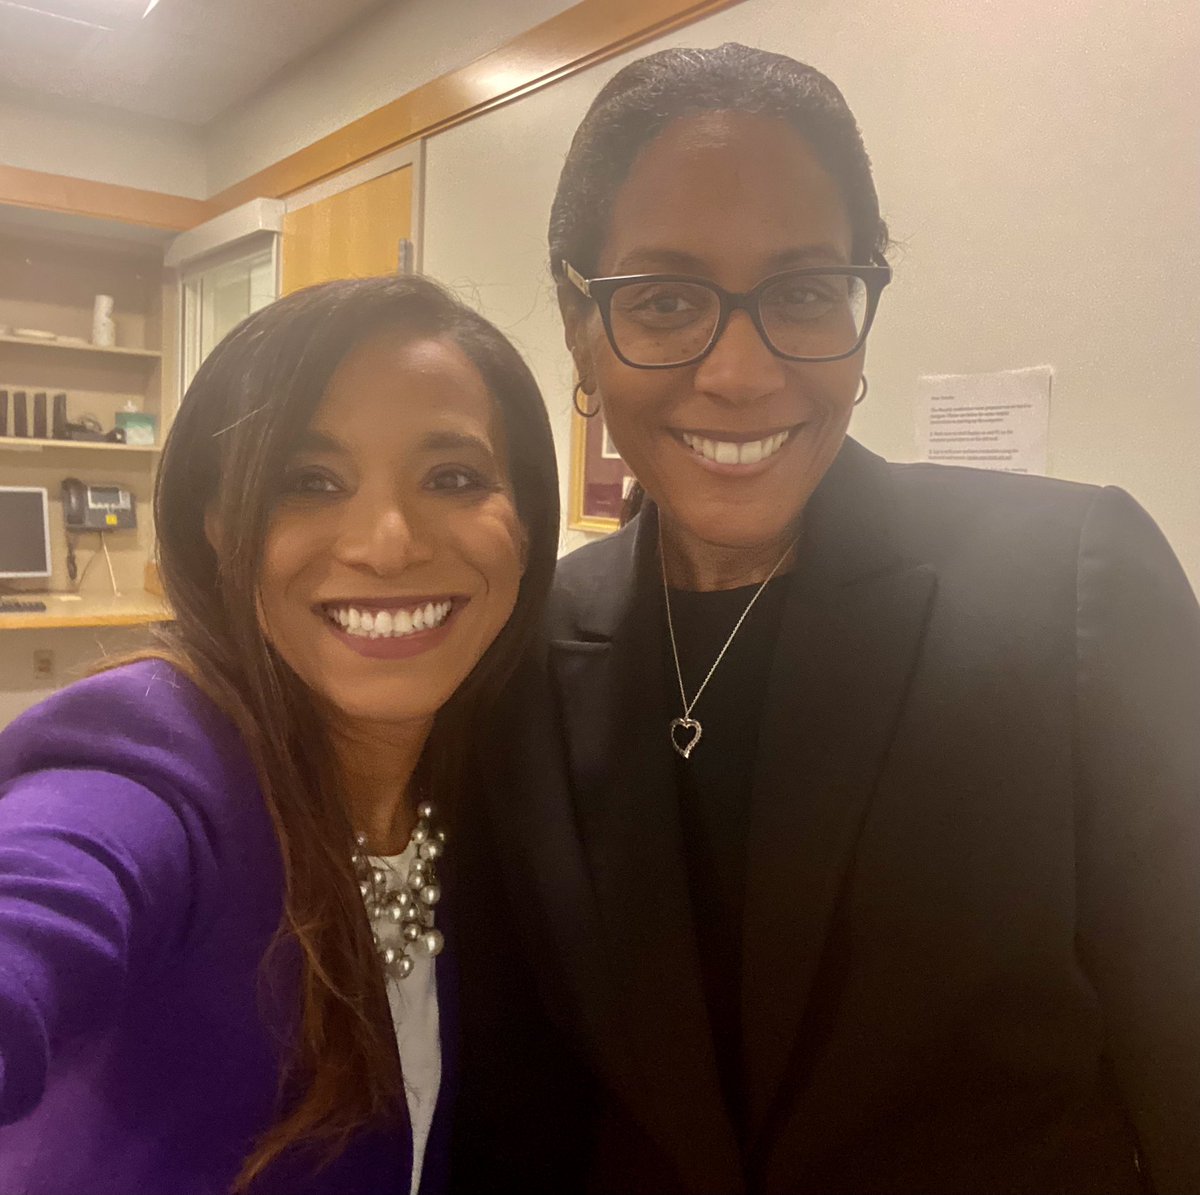 Today we welcomed @kewatson to @MGHHeartHealth CV grand rounds and learned about vascular calcifications from 👩🏾‍🔬 the bench ➡️ multiethnic population studies ➡️ the bedside. During our fellow’s interview, we discussed her career journey, women’s 🚺#hearthealth & CV #healthequity!